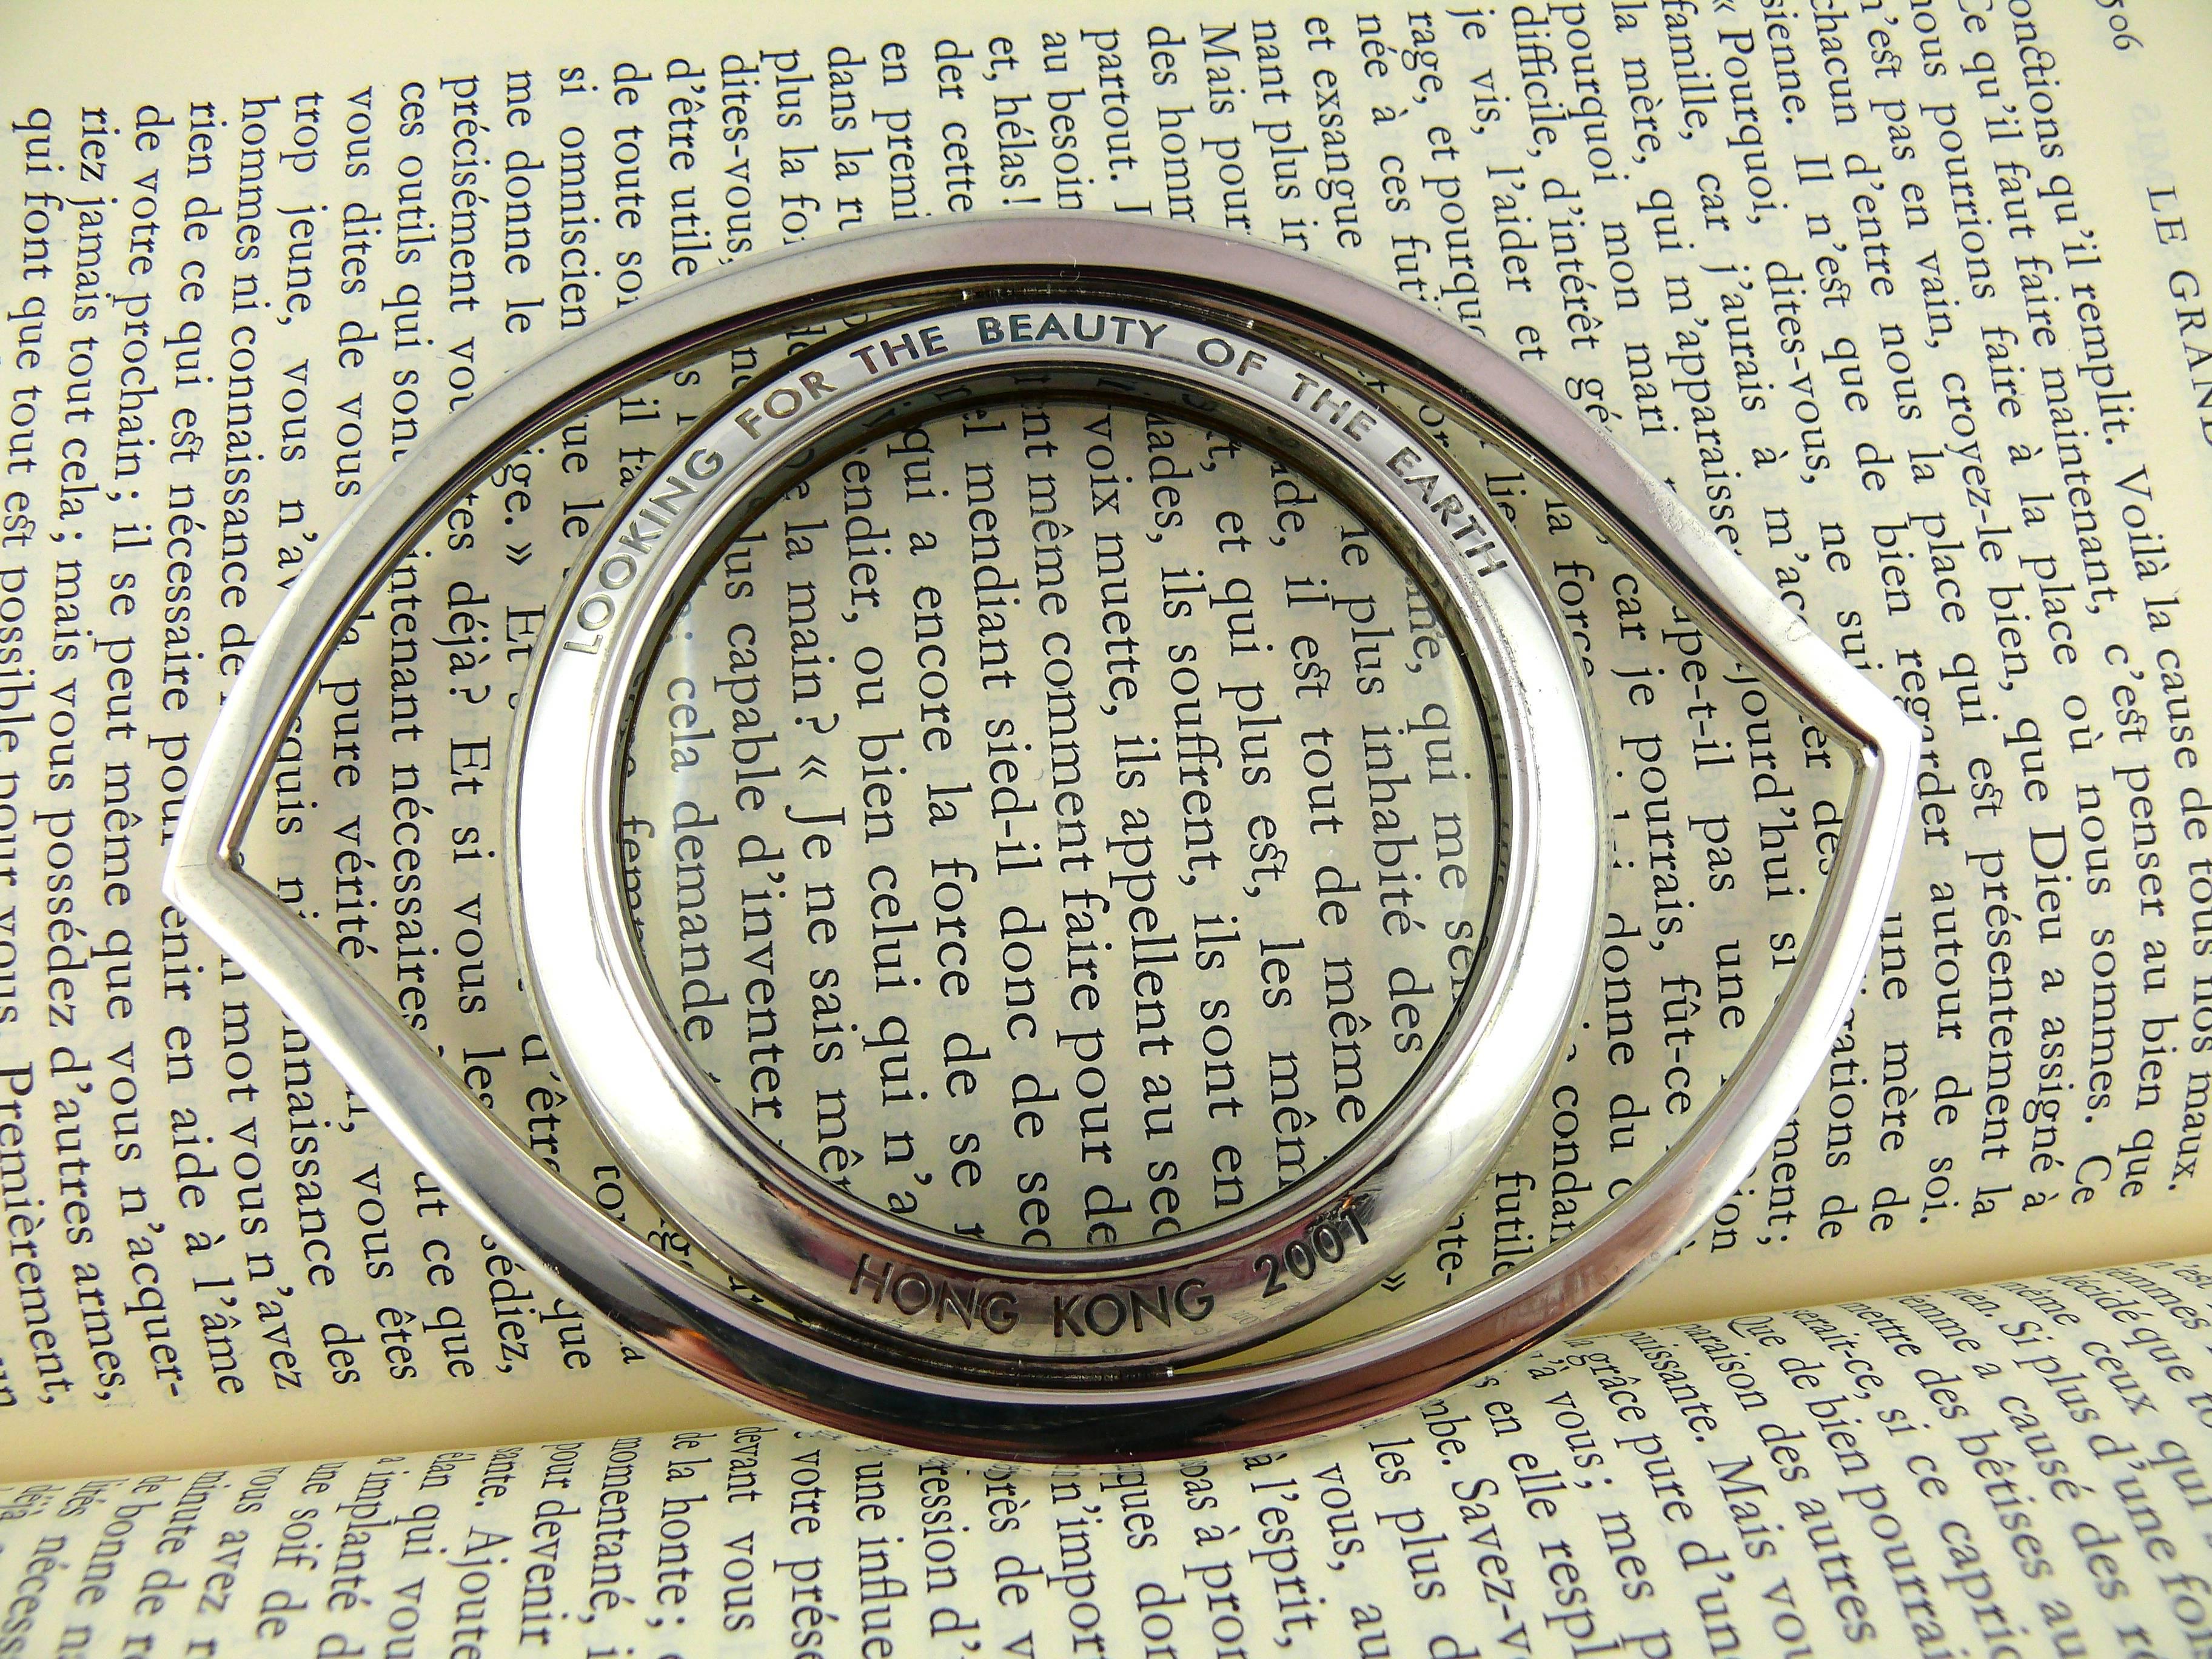 HERMES silver plated desk magnifying glass featuring a massive eye.

Engraved quote 